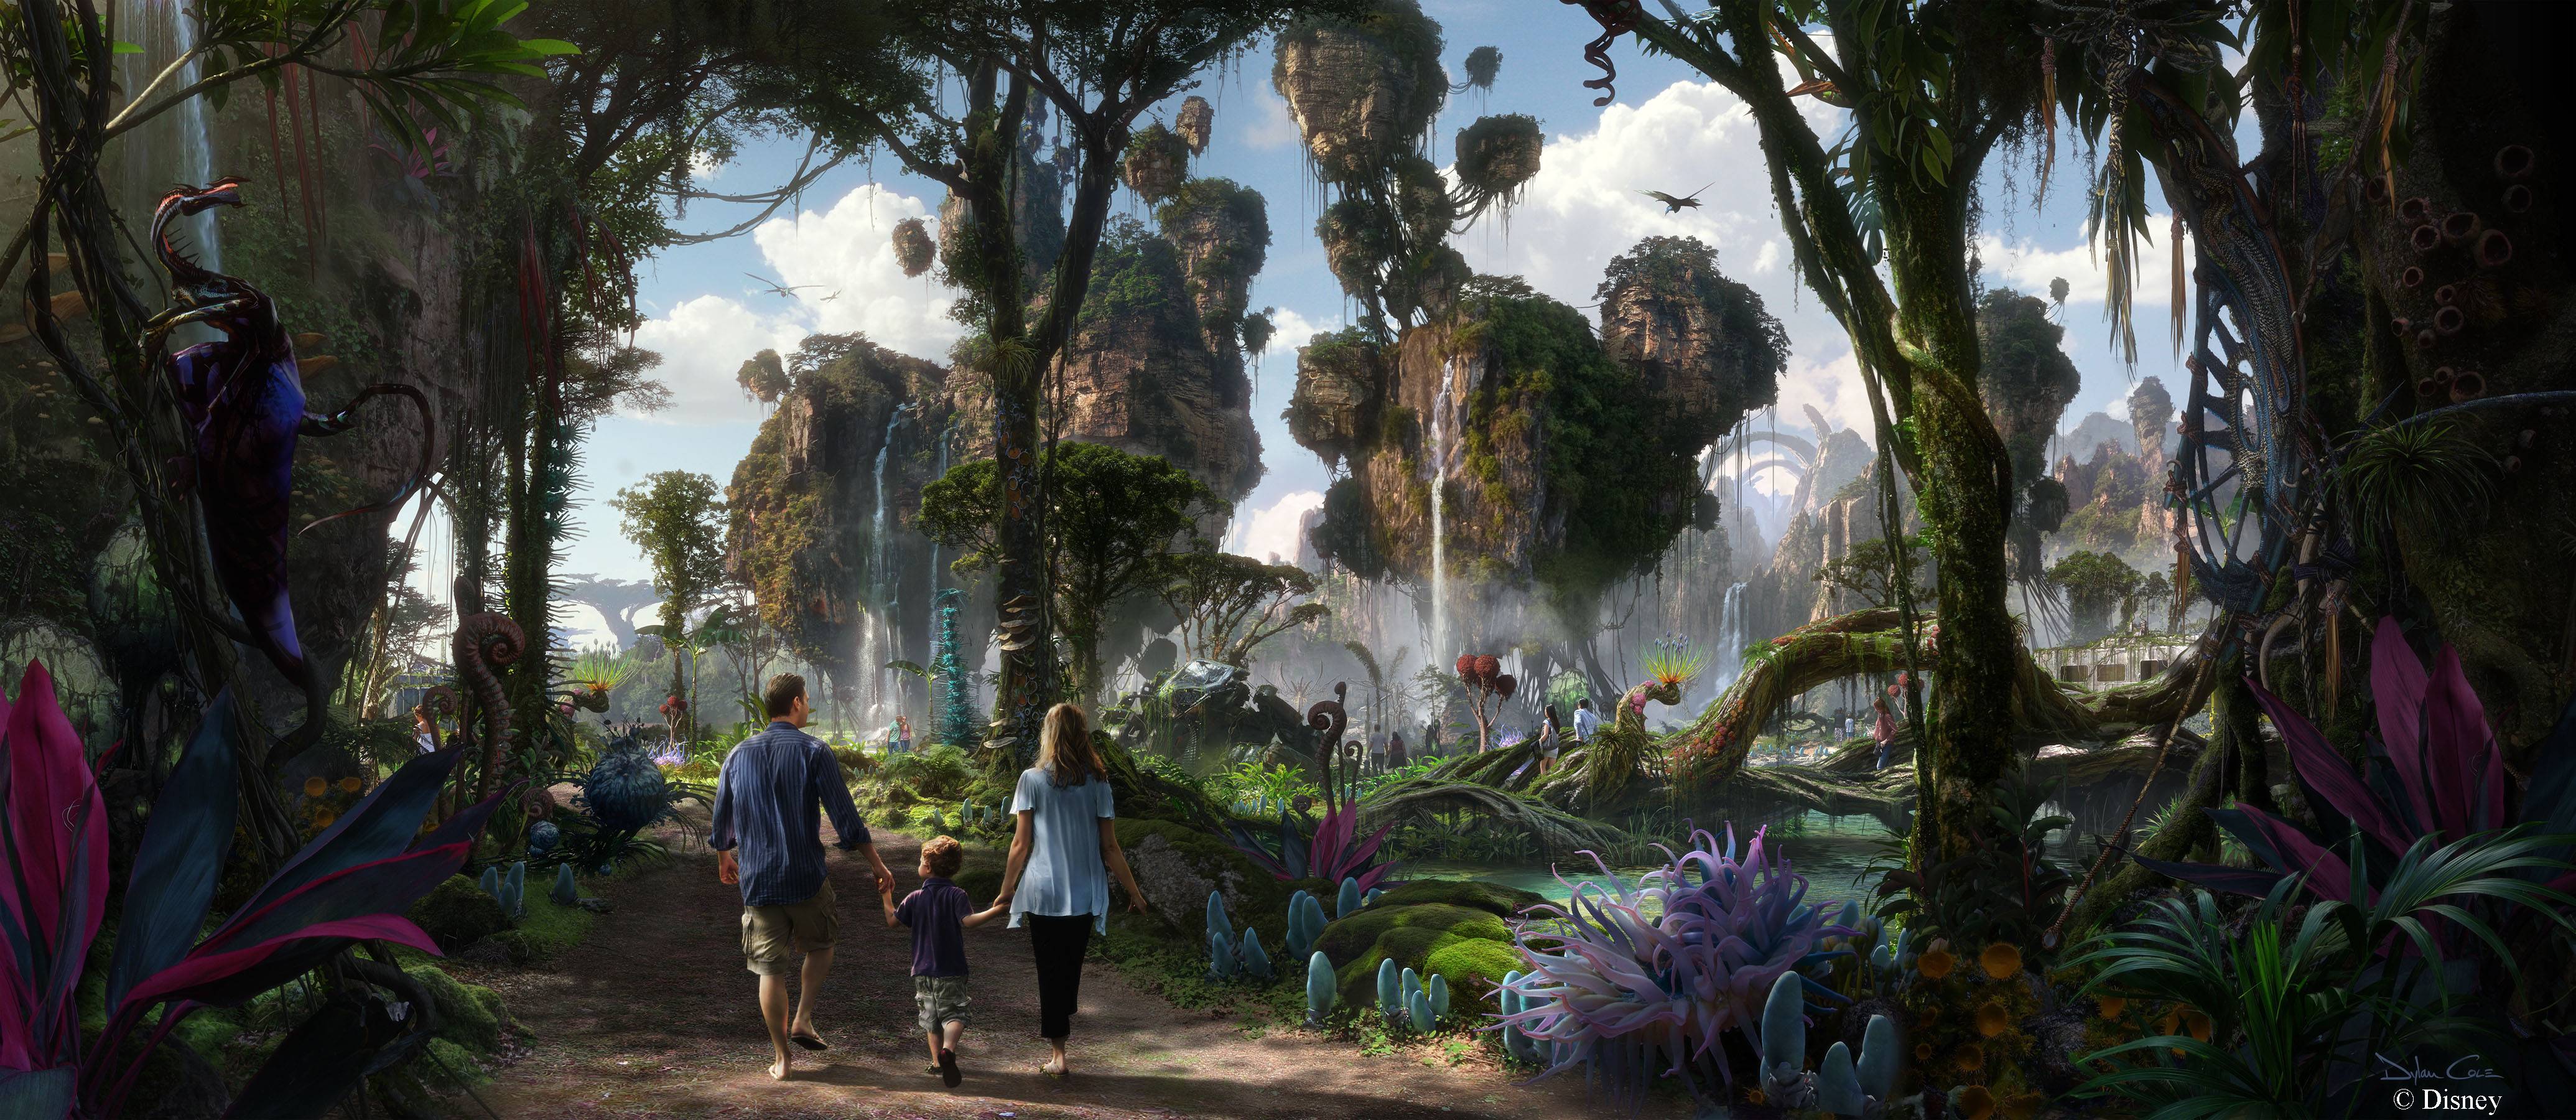 D-Ticket river cruise appears to be confirmed for AVATAR Land at Disney's Animal Kingdom